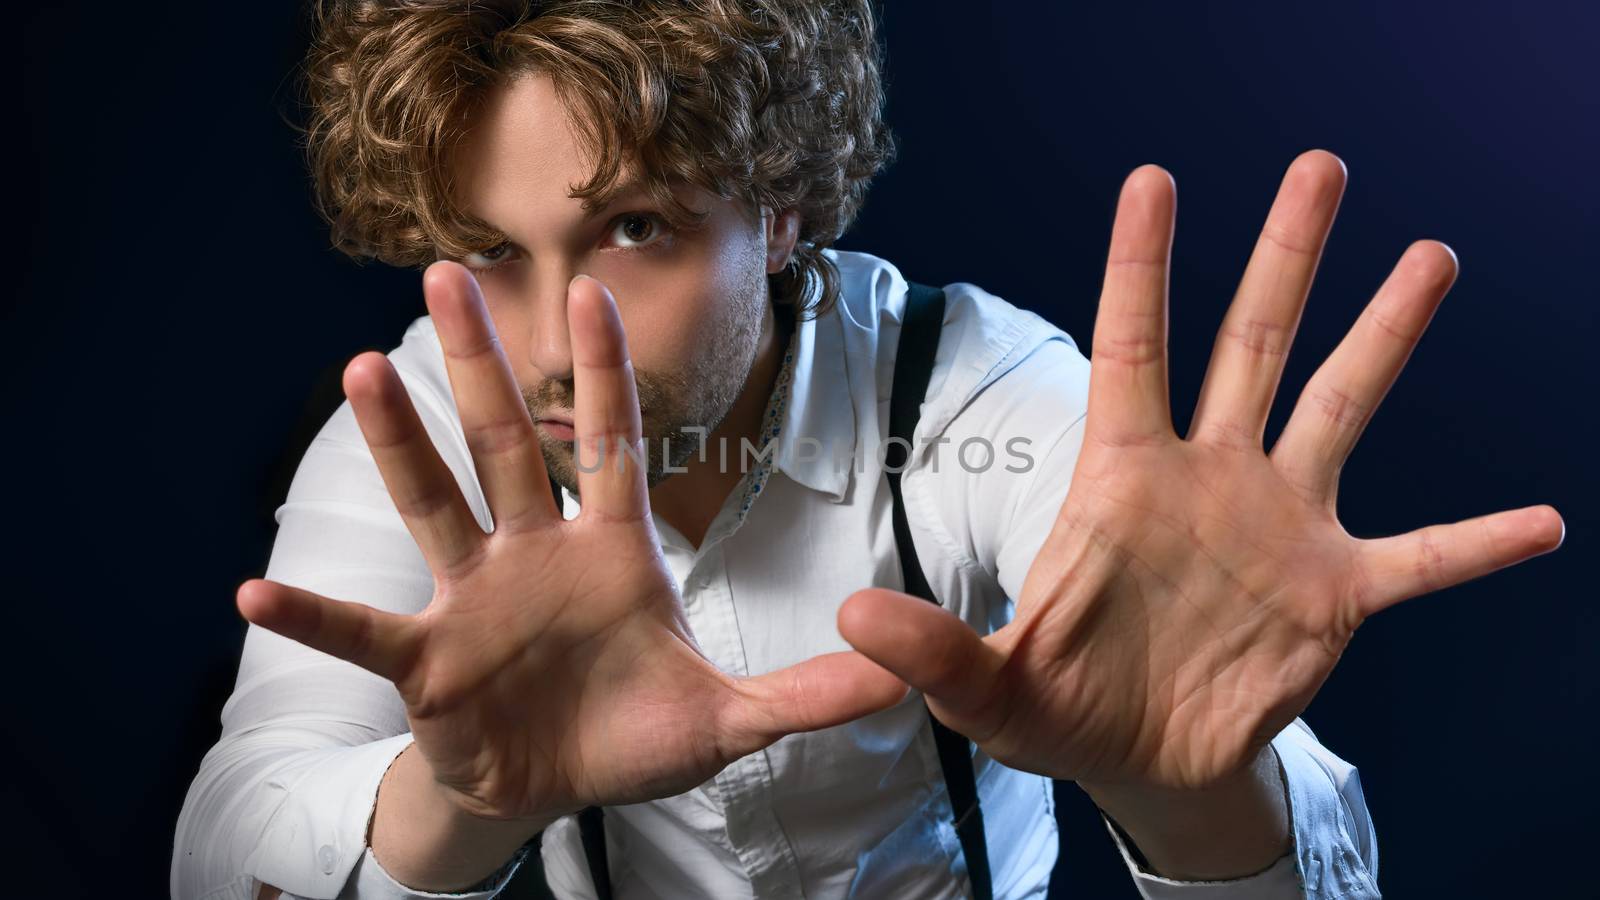 image of a man who performs magic with his hands